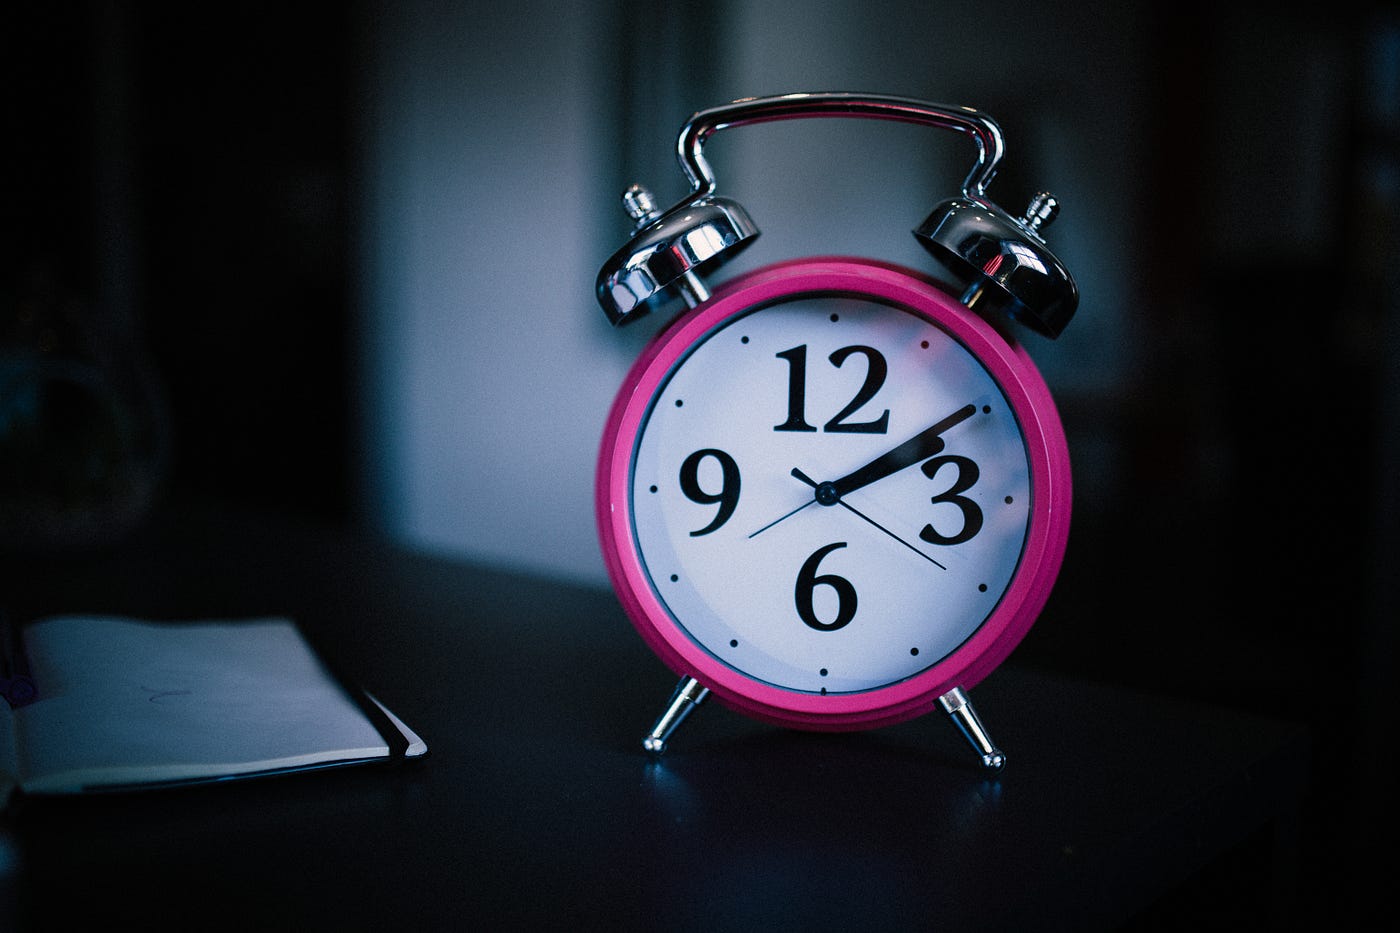 An alarm clock helps set times for sleeping and waking